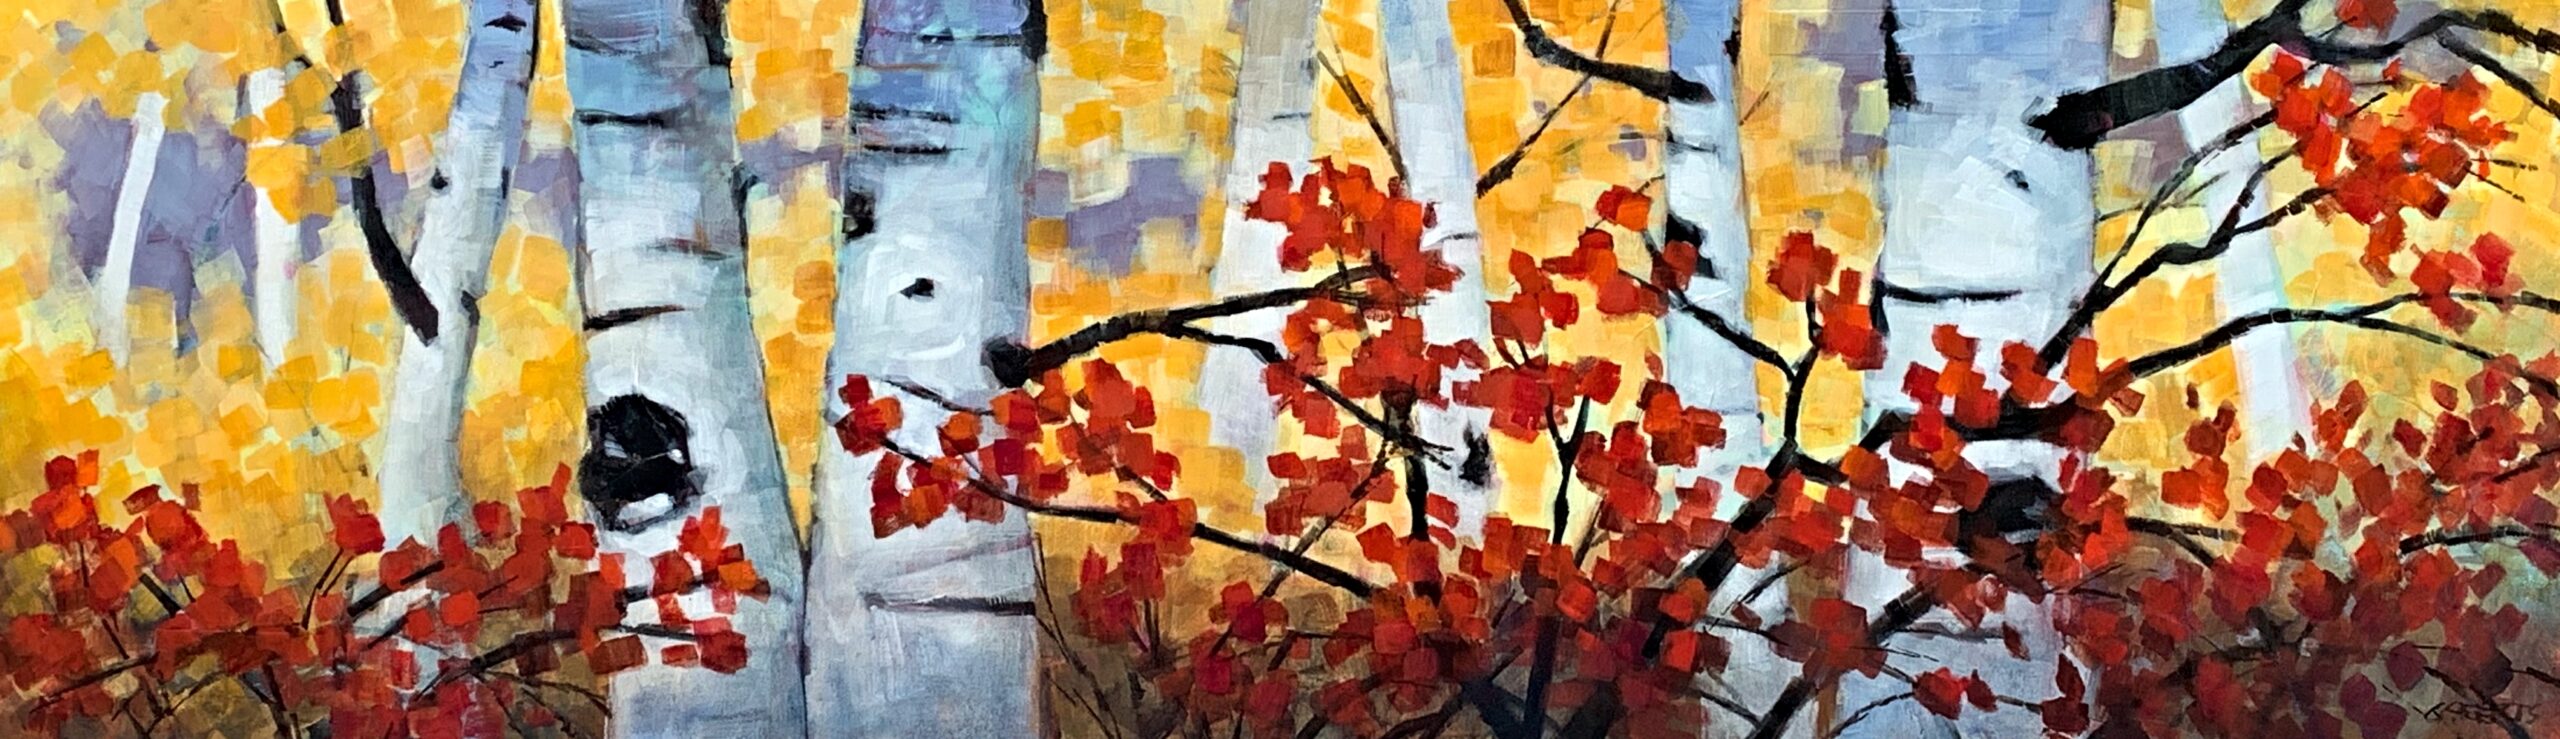 Bright Forest mixed media tree landscape painting by Connie Geerts | Effusion Art Gallery, Invermere BC